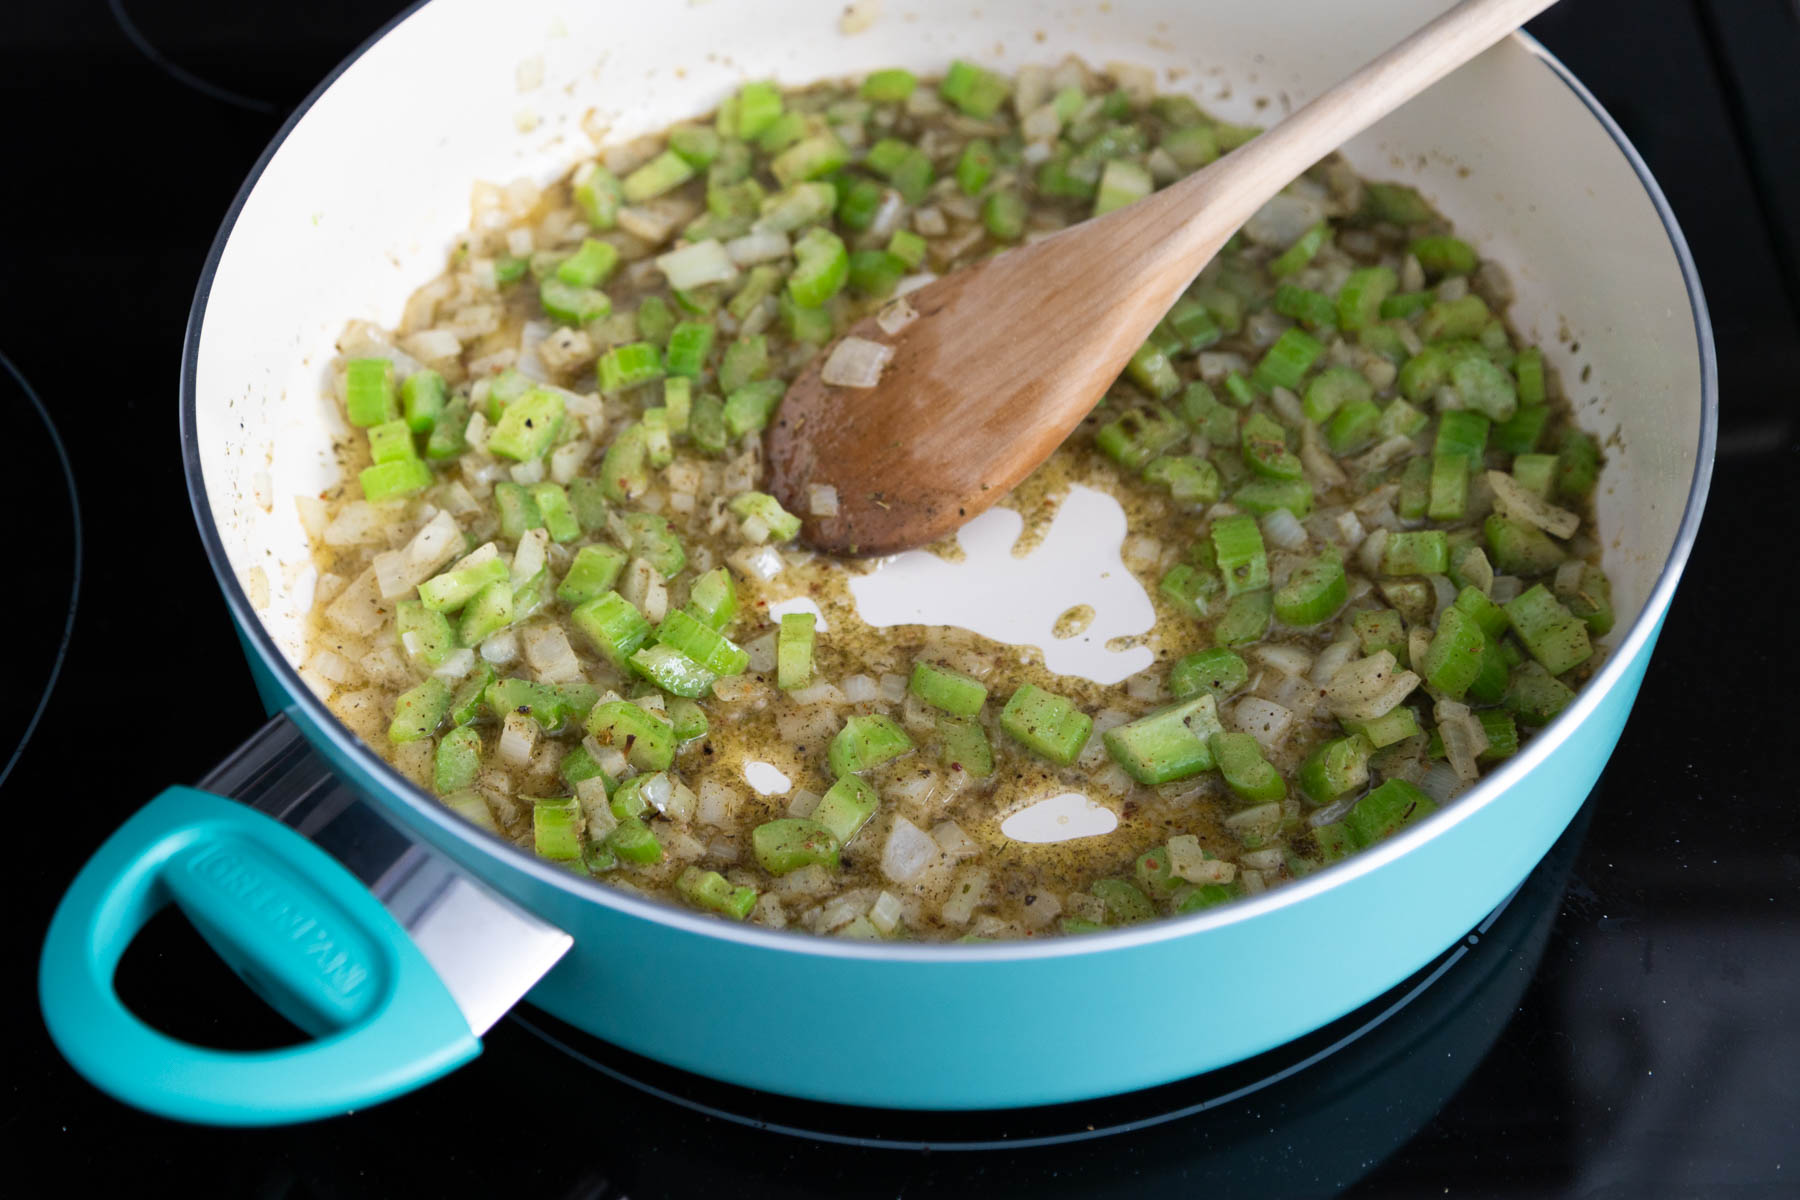 The chopped onion and celery are cooking in a skillet with melted butter.